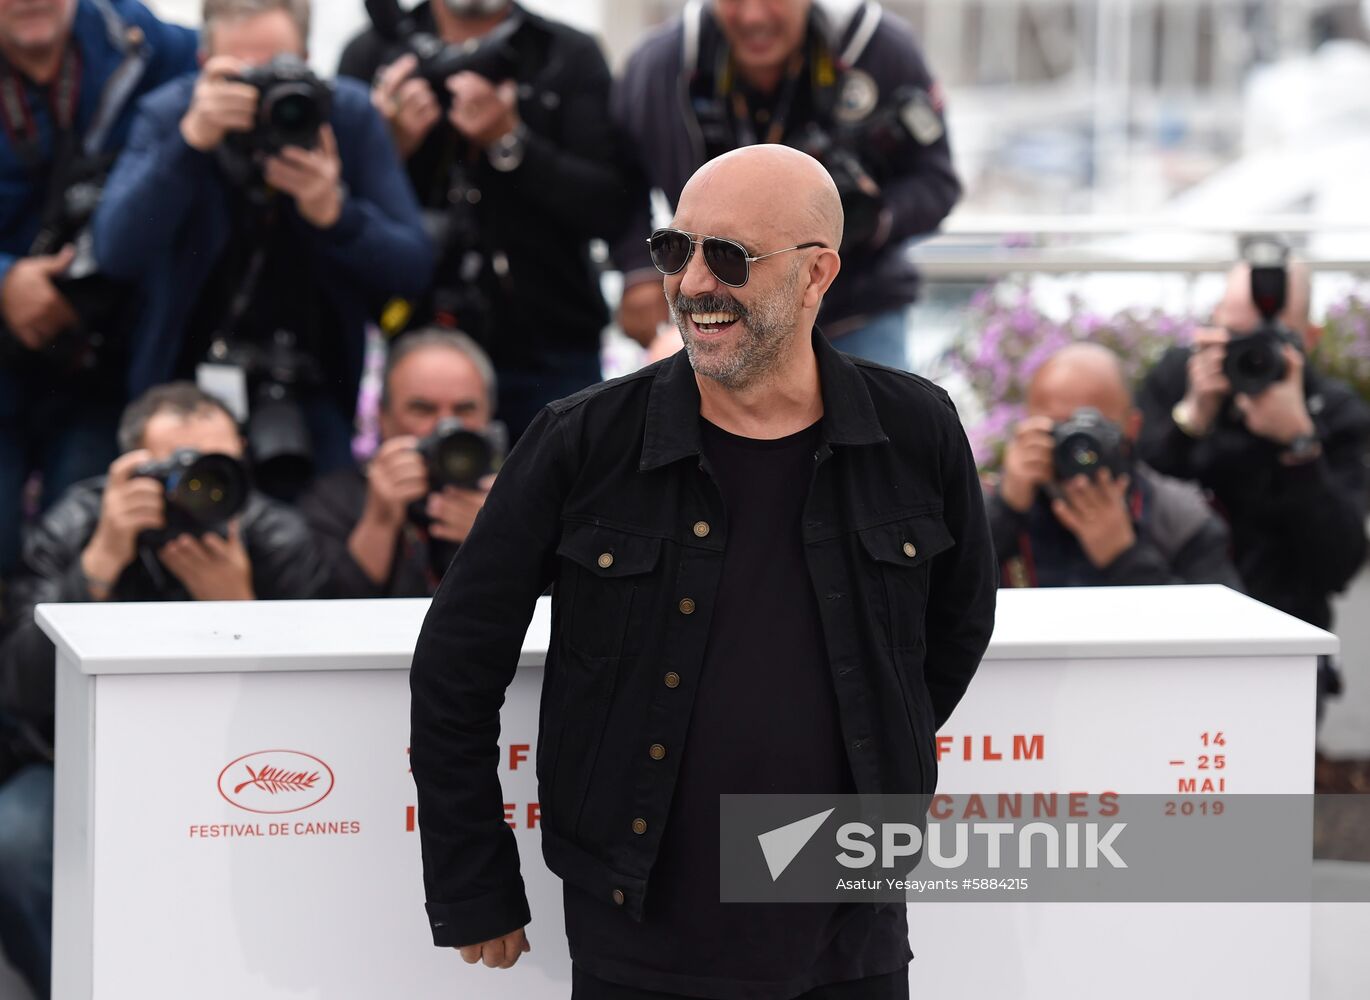 France Cannes Film Festival Lux Aeterna